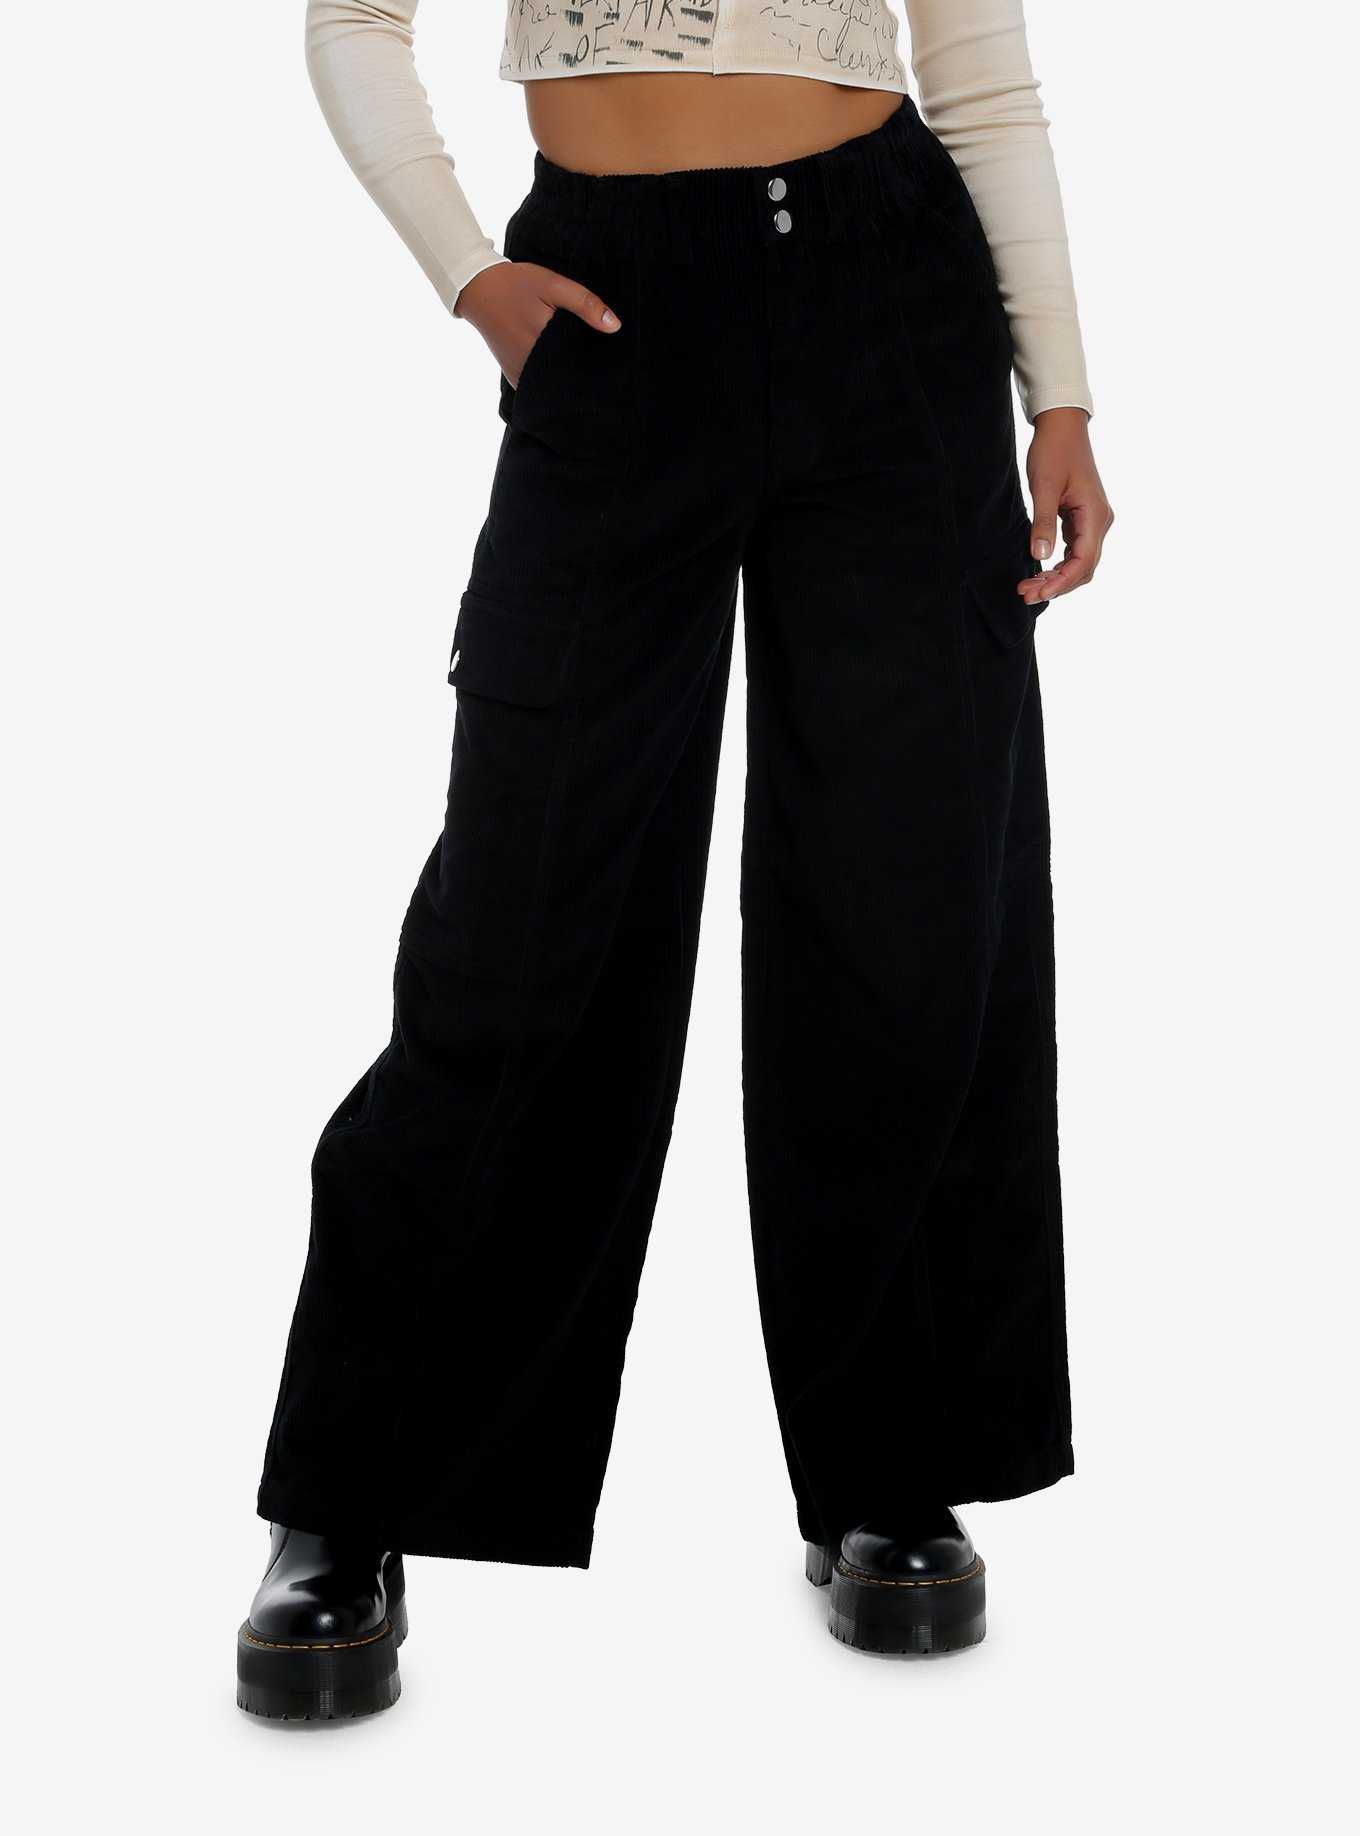 Hot Topic Black Side Chain Button Flare Pants